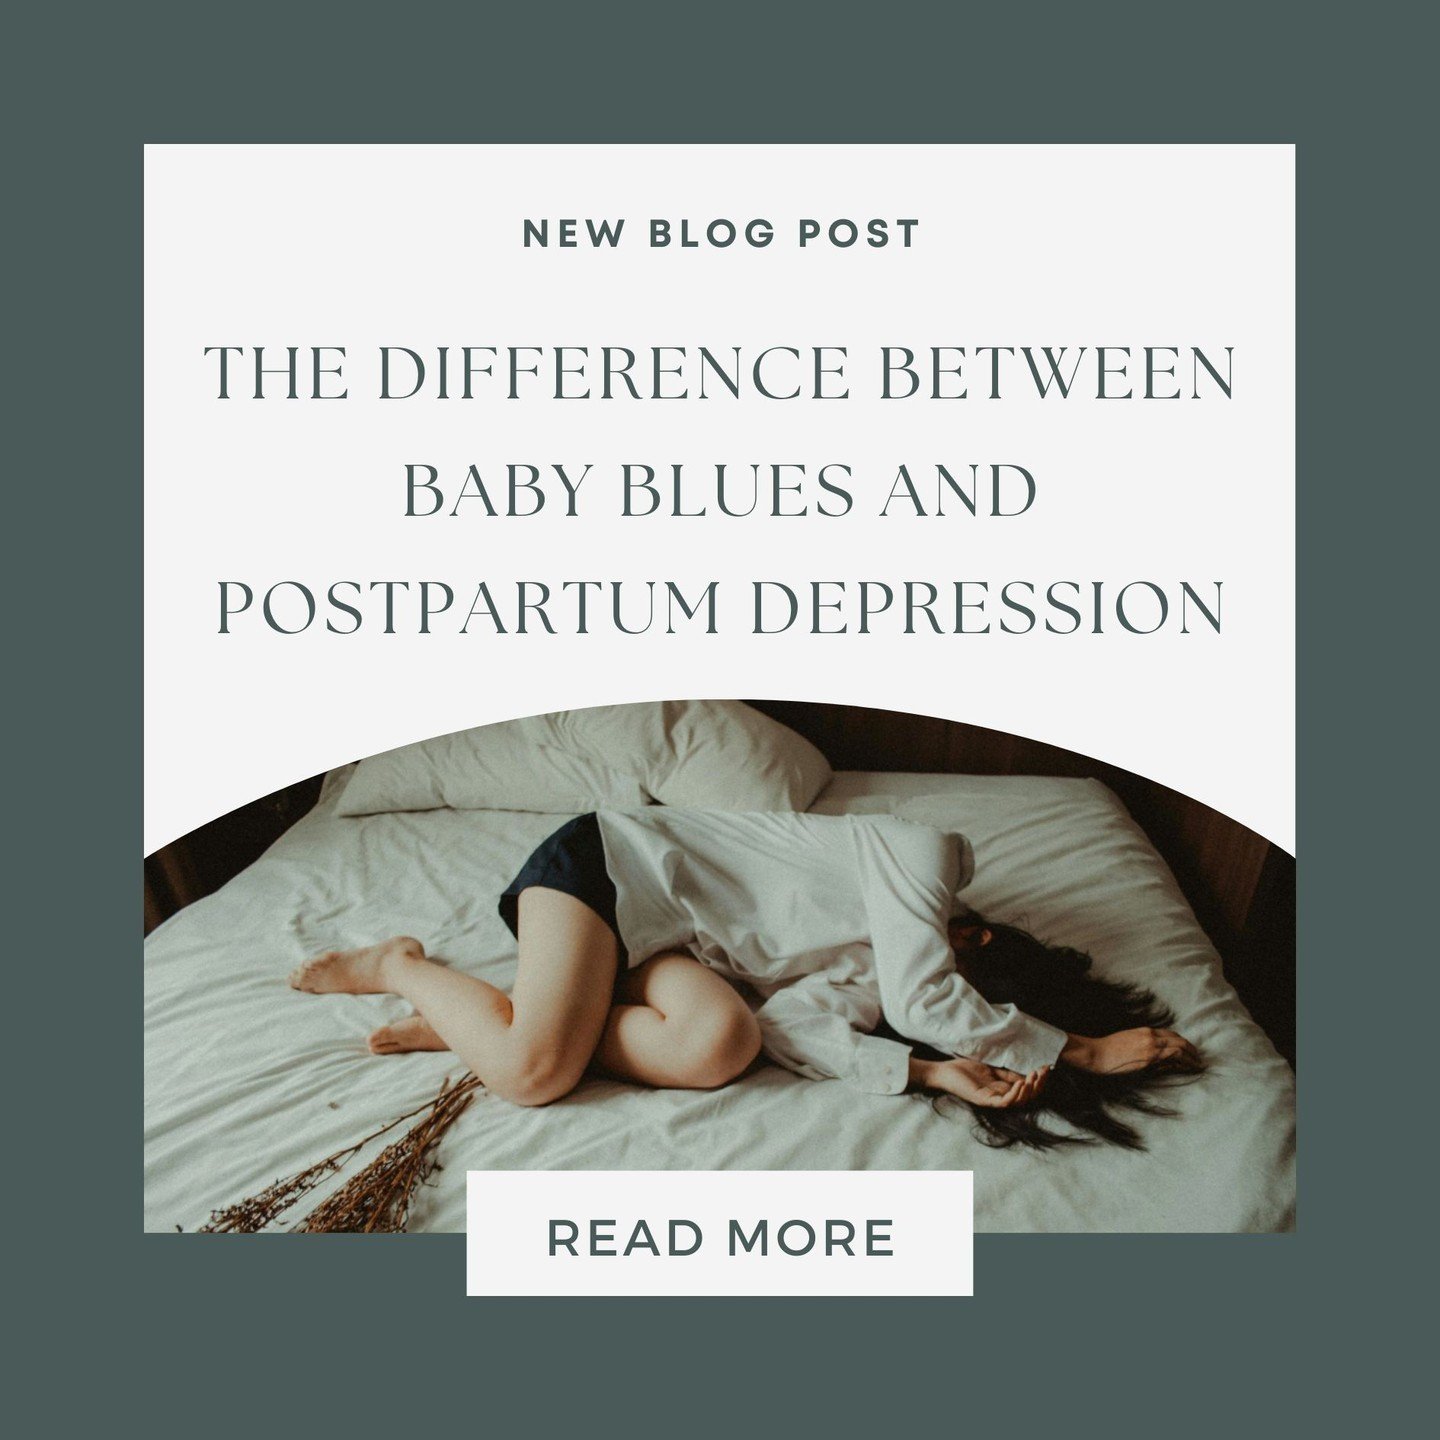 New blog post out now!

&gt; The Difference Between Baby Blues and Postpartum Depression

🔗 Go and give this a read via the link in my bio!

--
#newblog #blogpost #mumsblog #postpartum #abudhabublog #mumsblogpost #mumsupport